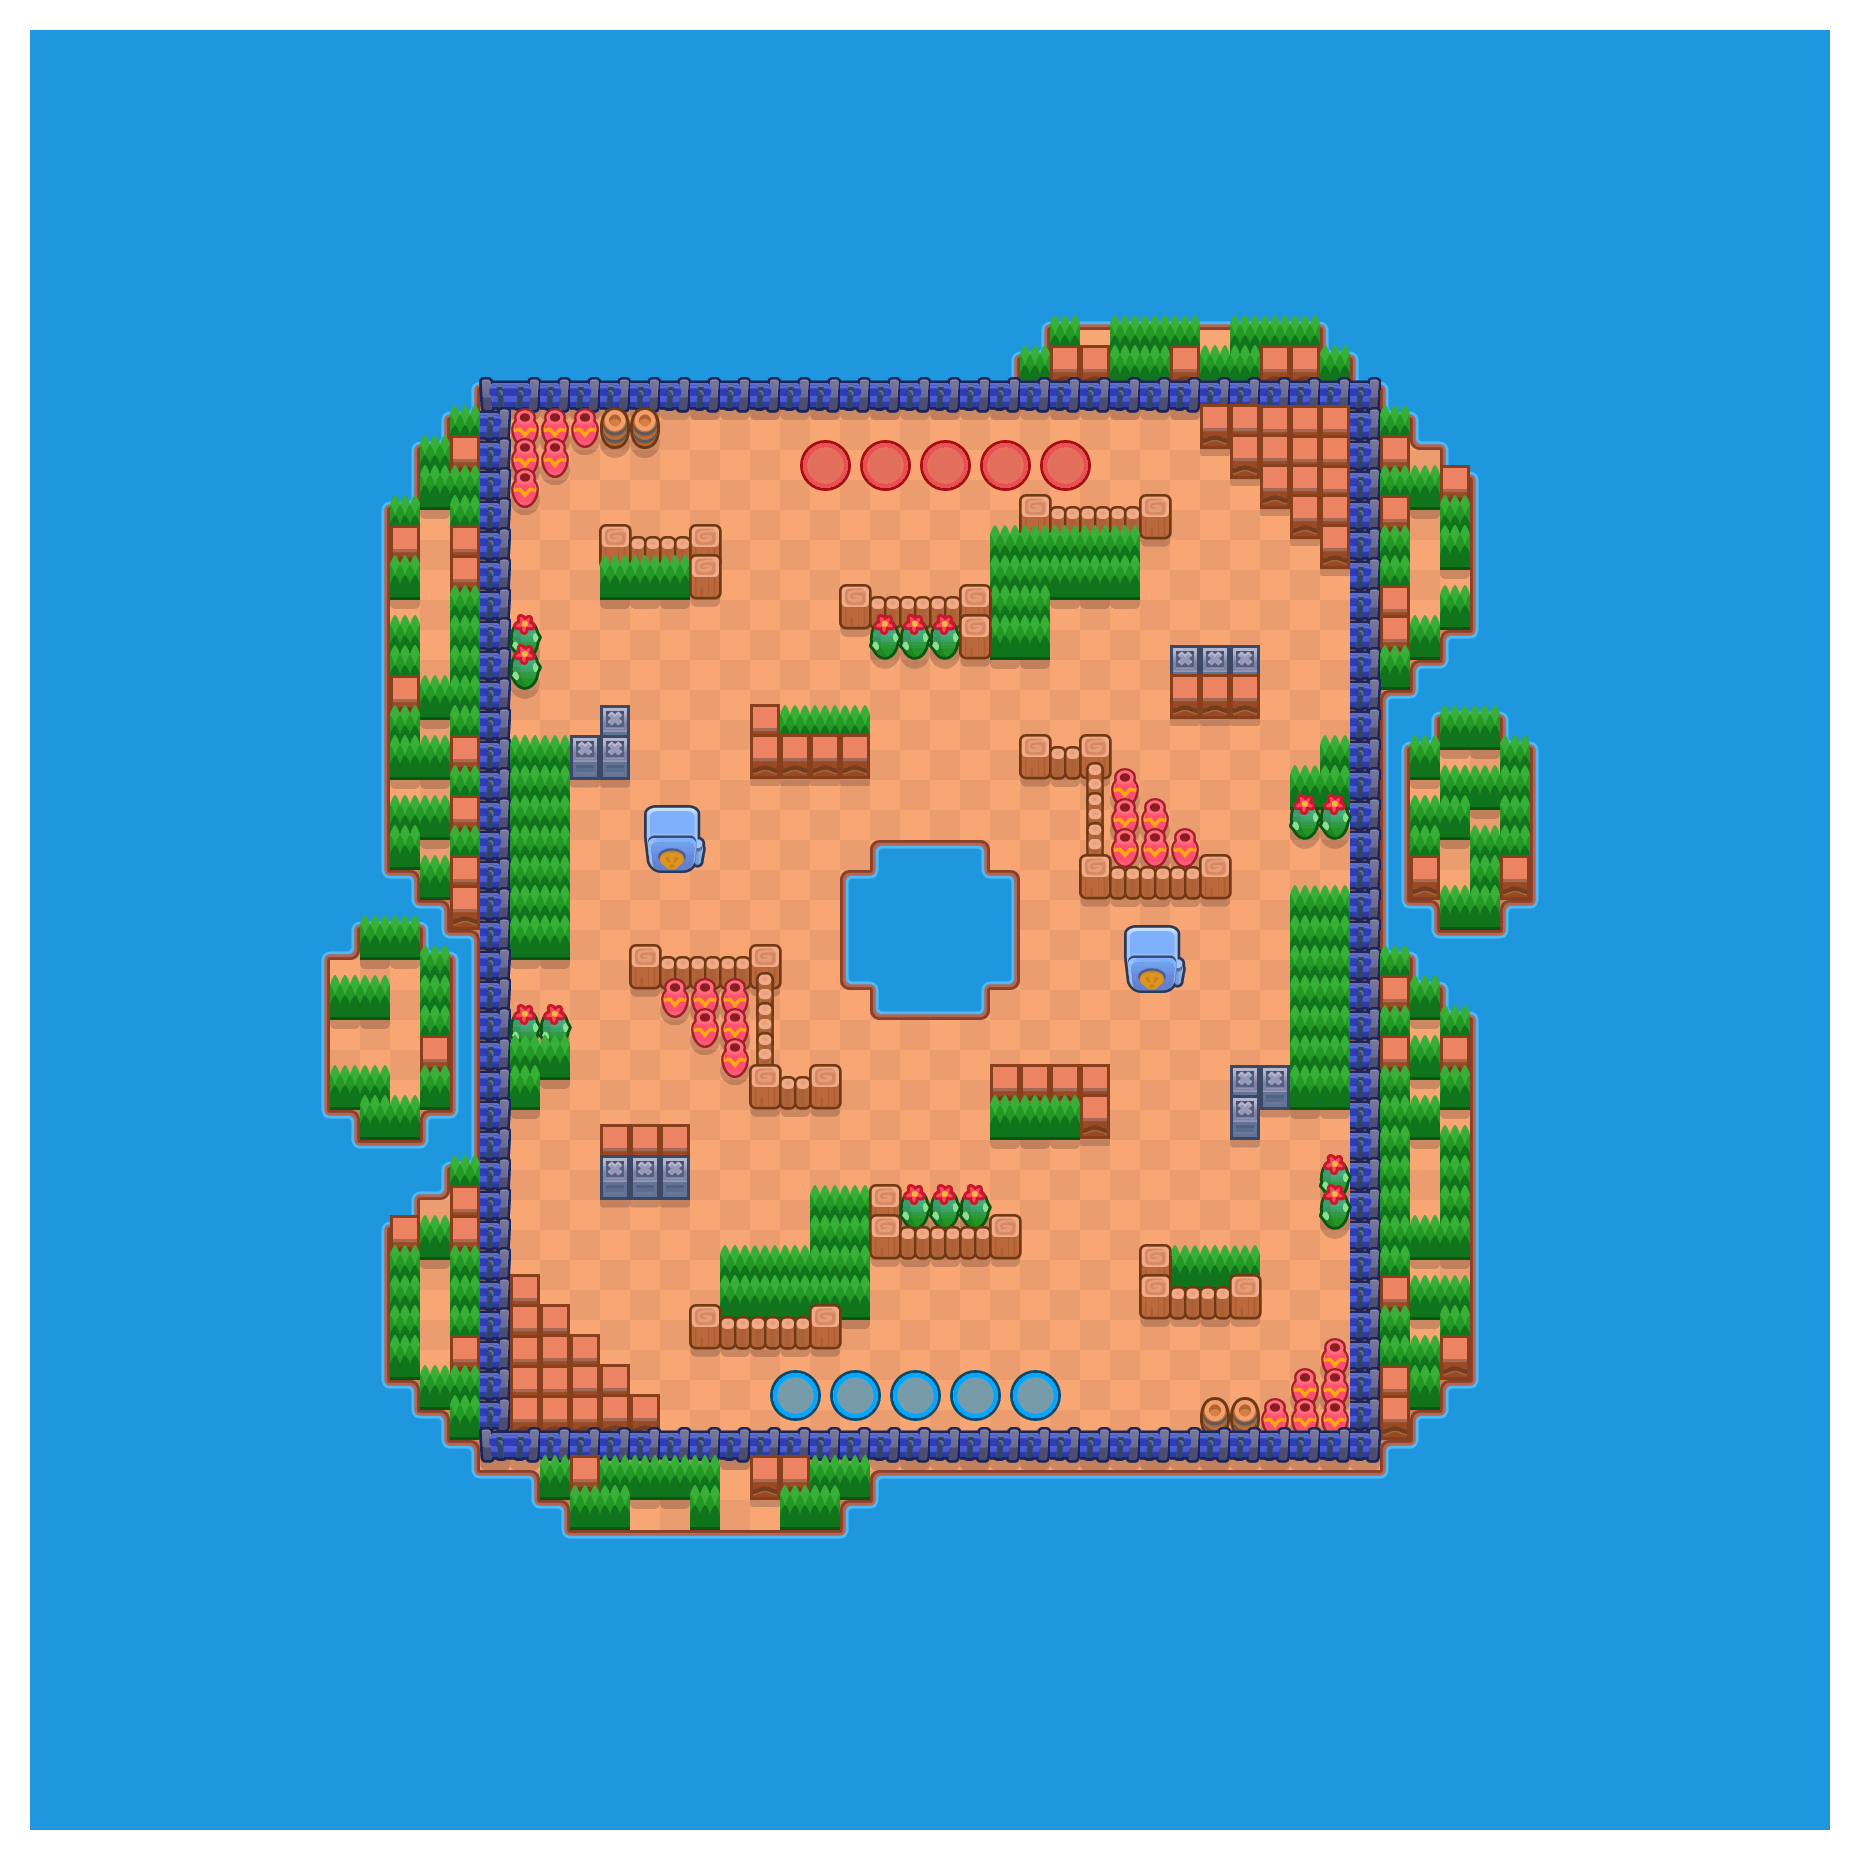 Cold Pond Quarry is a Gem Grab Brawl Stars map. Check out Cold Pond Quarry's map picture for Gem Grab and the best and recommended brawlers in Brawl Stars.